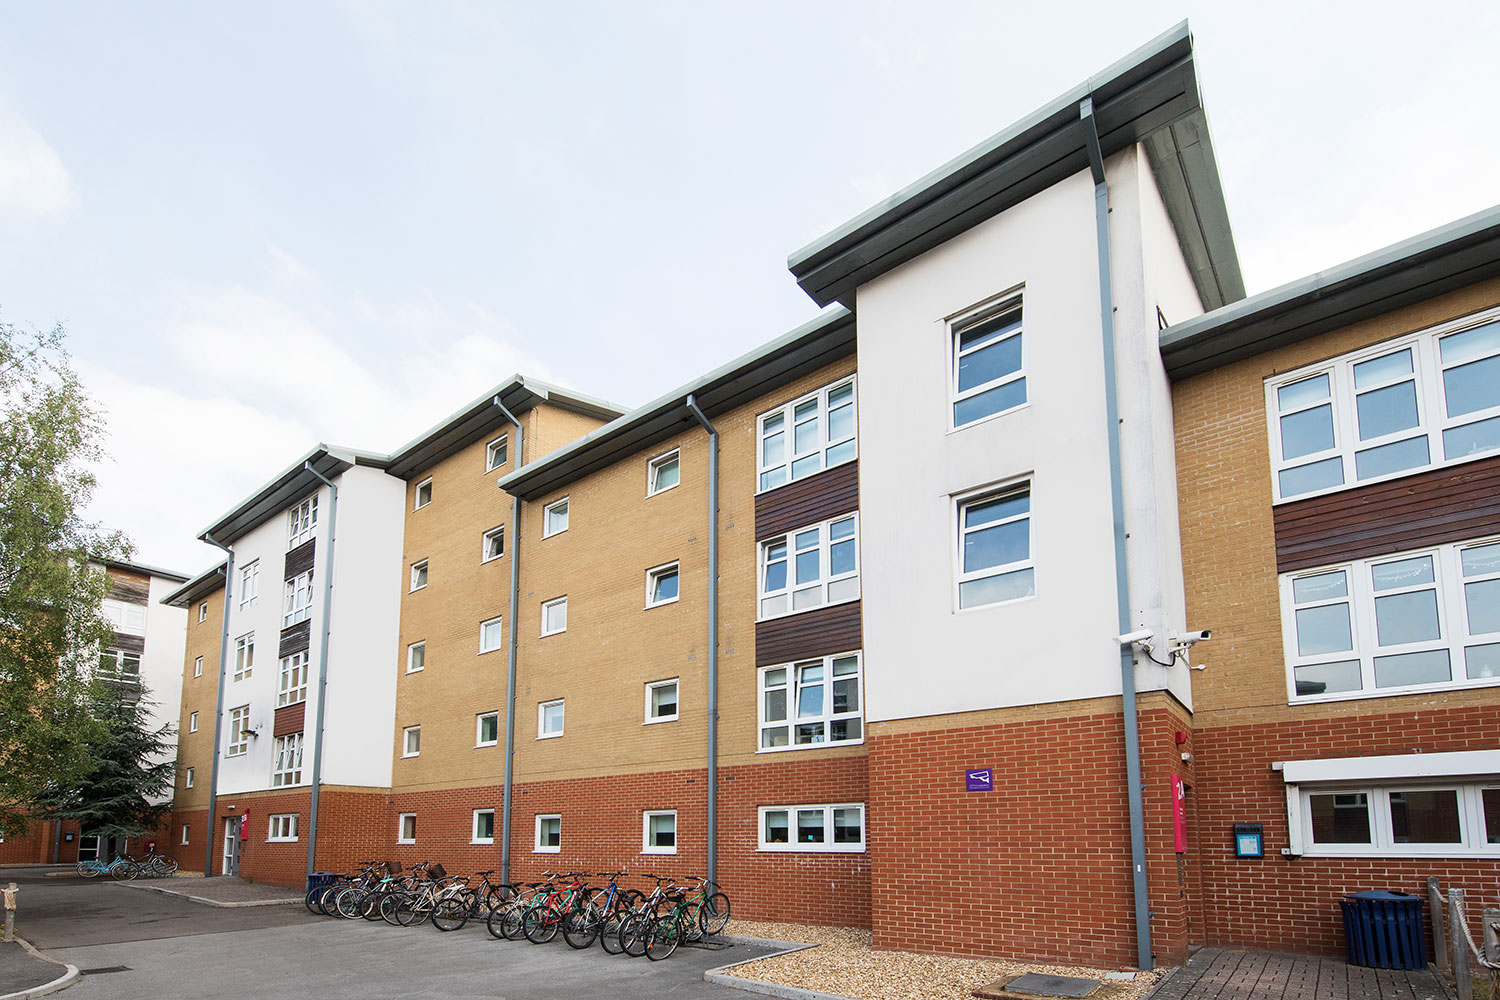 Unite Students accommodation at Severn Point in Cardiff